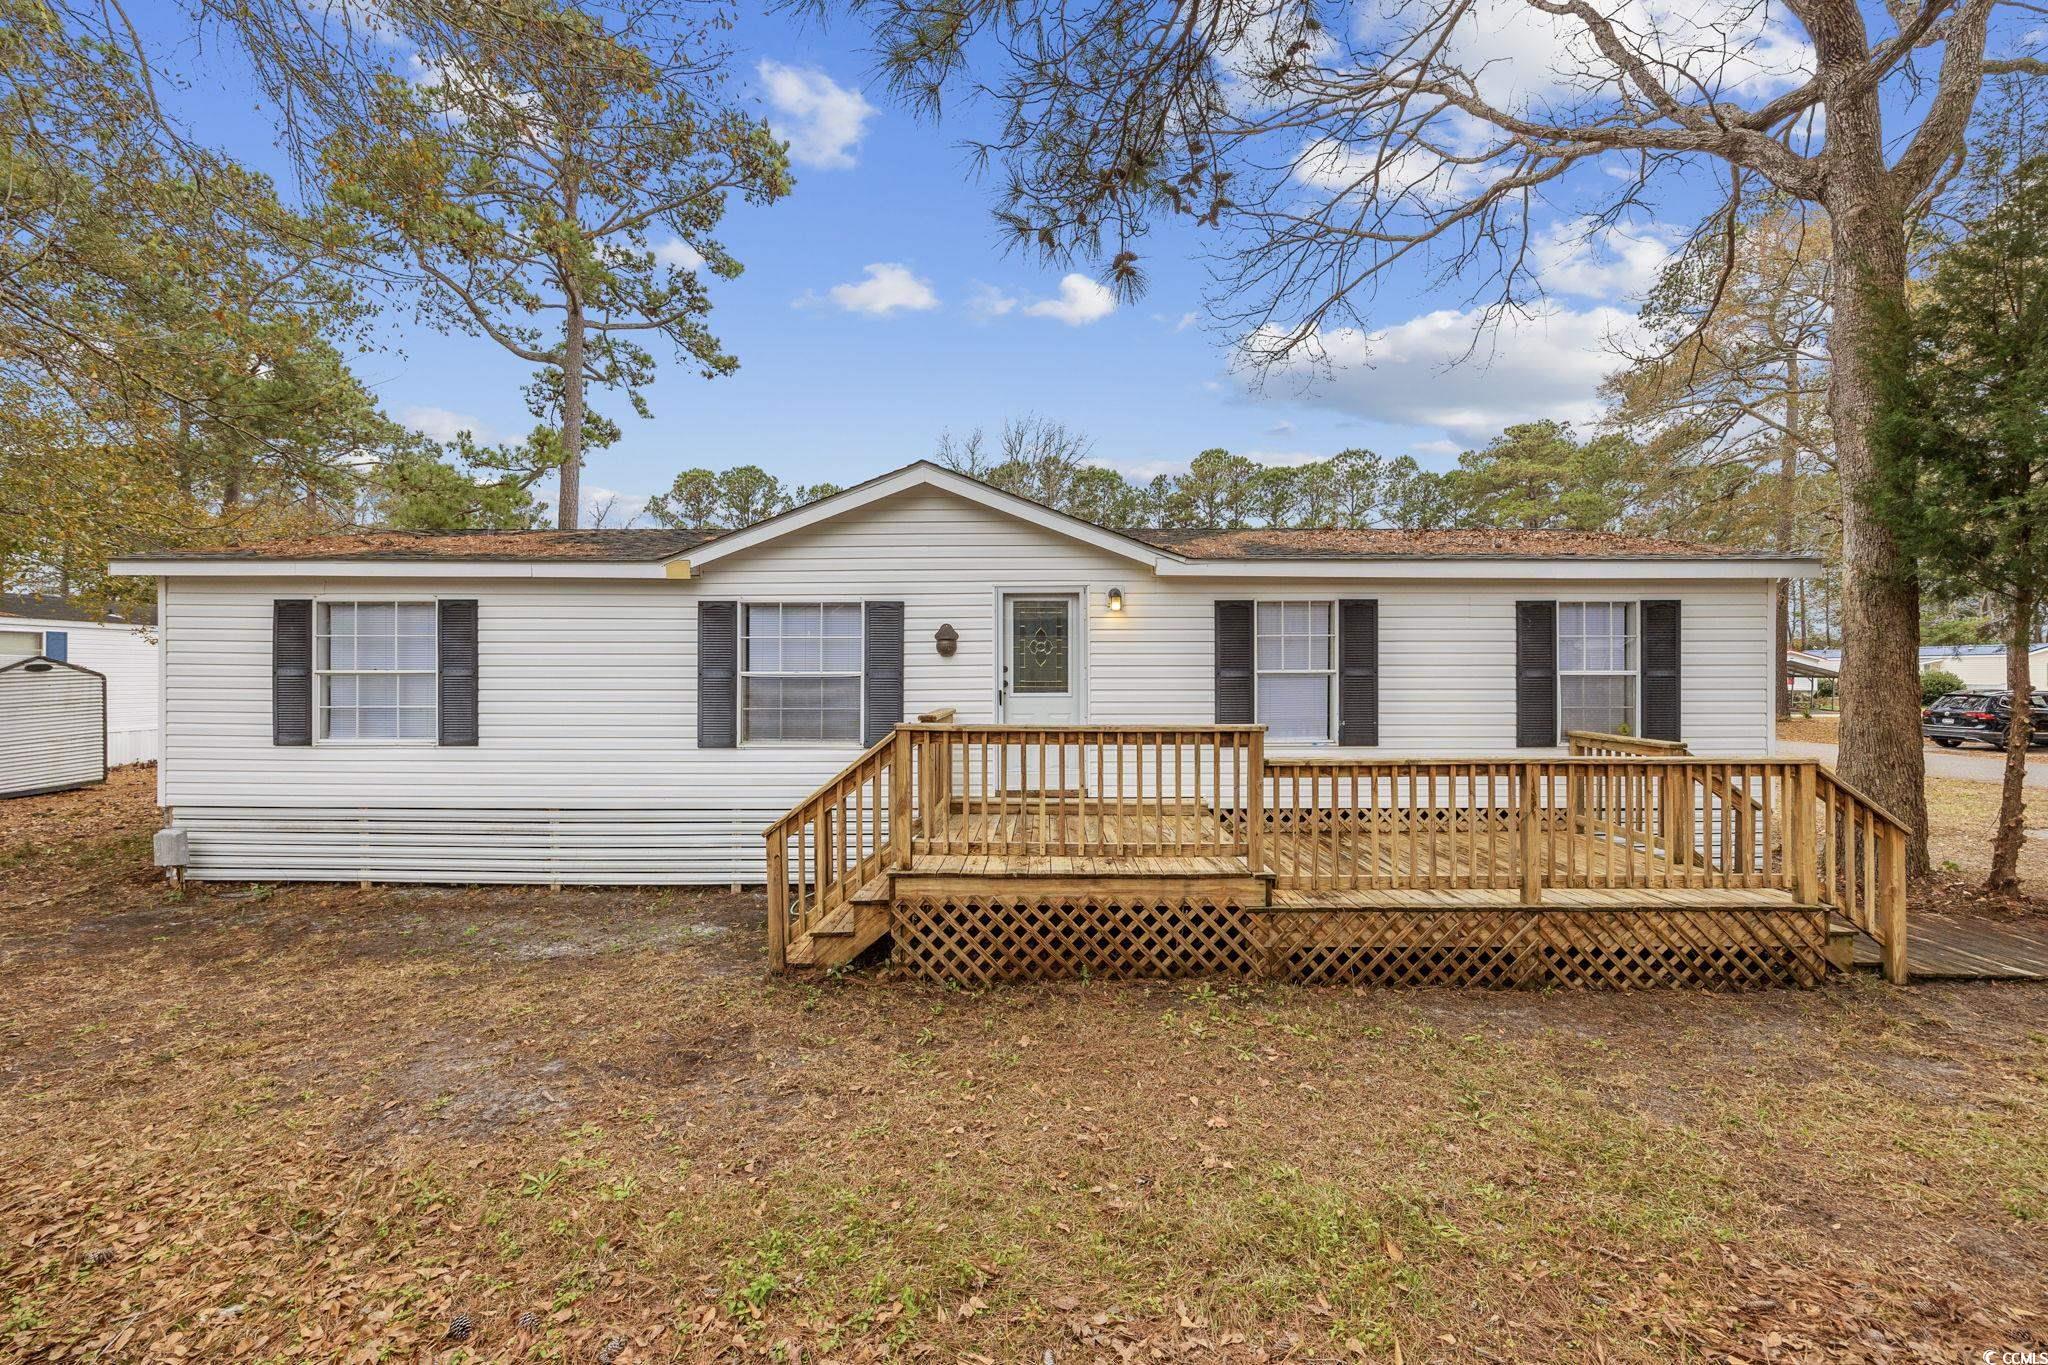 experience coastal living in this delightful 3-bedroom, 2-bathroom double-wide manufactured home within the peaceful windjammer village. this property is the perfect blank slate and ready for new owners. the interior has been refreshed and features a spacious living area, an inviting kitchen, and a large outdoor deck perfect for grilling and entertaining. enjoy the community's amenities, including a pool and clubhouse. this home is centrally located just moments away from some of the areas biggest draws. hop on your golf cart and enjoy the sun-drenched beaches and fishing off the garden city pier. or explore the lively bars and restaurants along murrells inlet marshwalk, or reconnect with nature at nearby brookgreen gardens and huntington state park. whether you're searching for a permanent residence or a vacation retreat, this property encapsulates the essence of coastal charm. book your tour today!